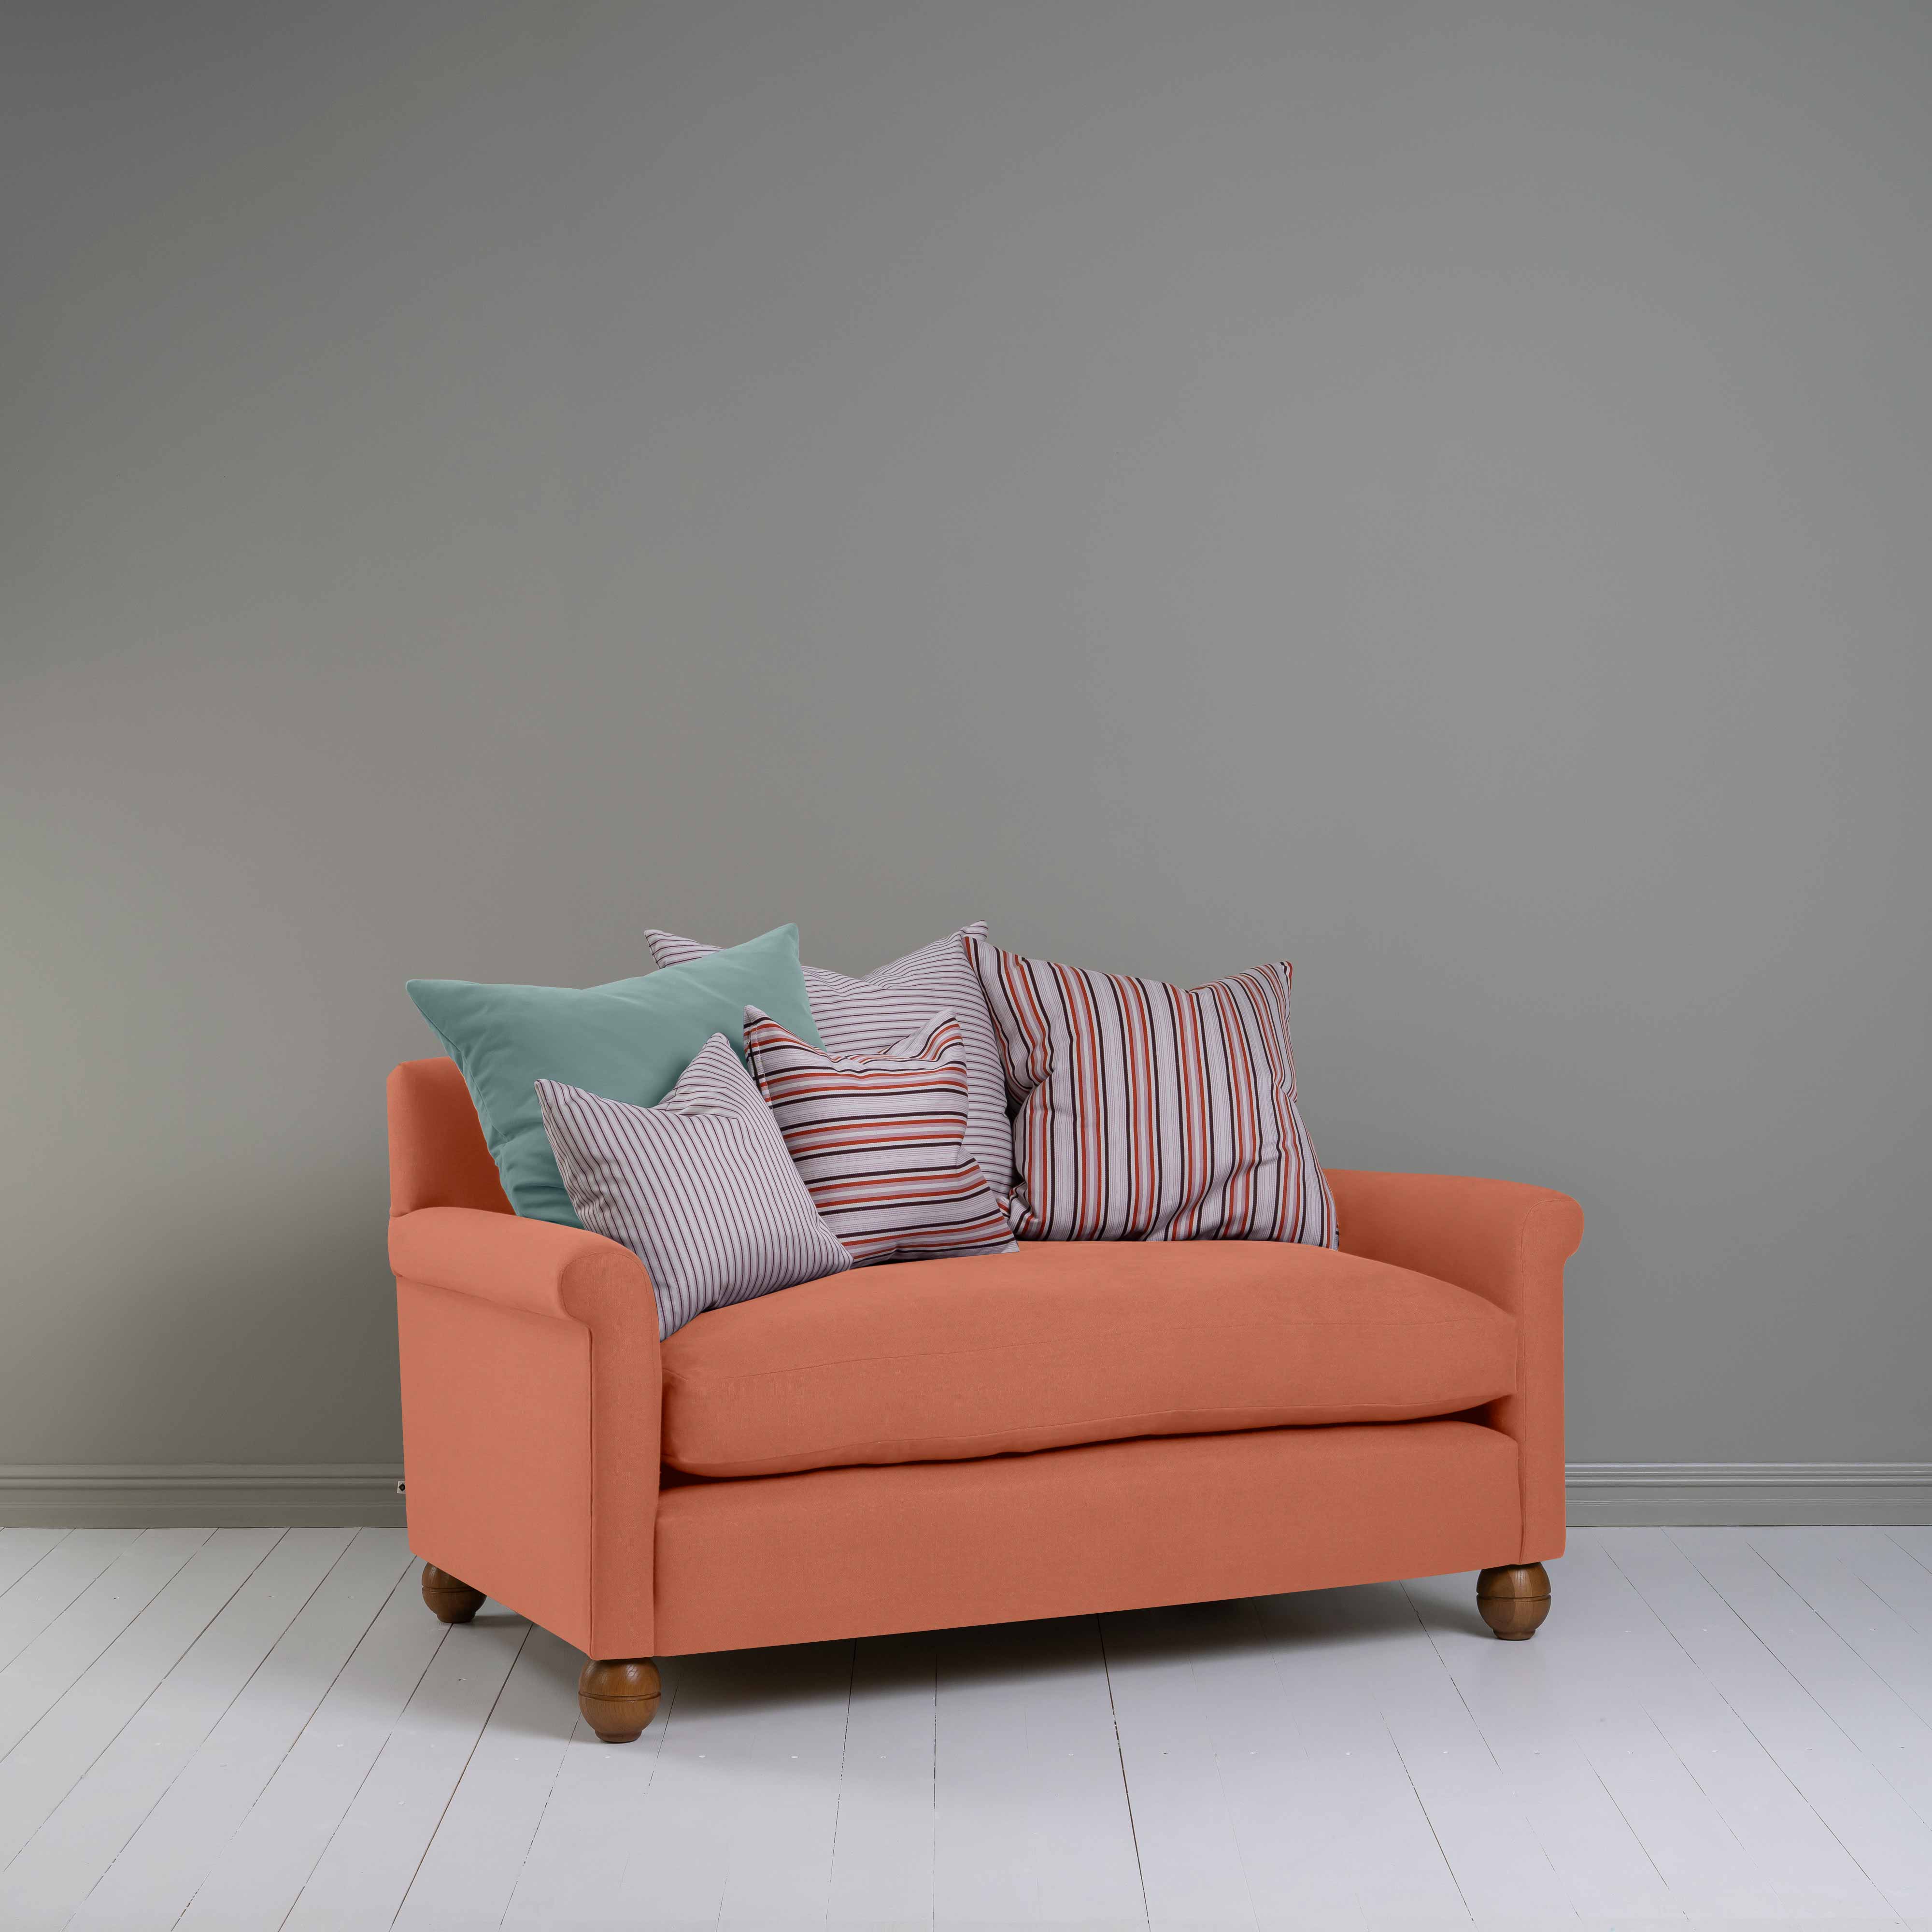  Idler 2 Seater Sofa in Laidback Linen Cayenne 